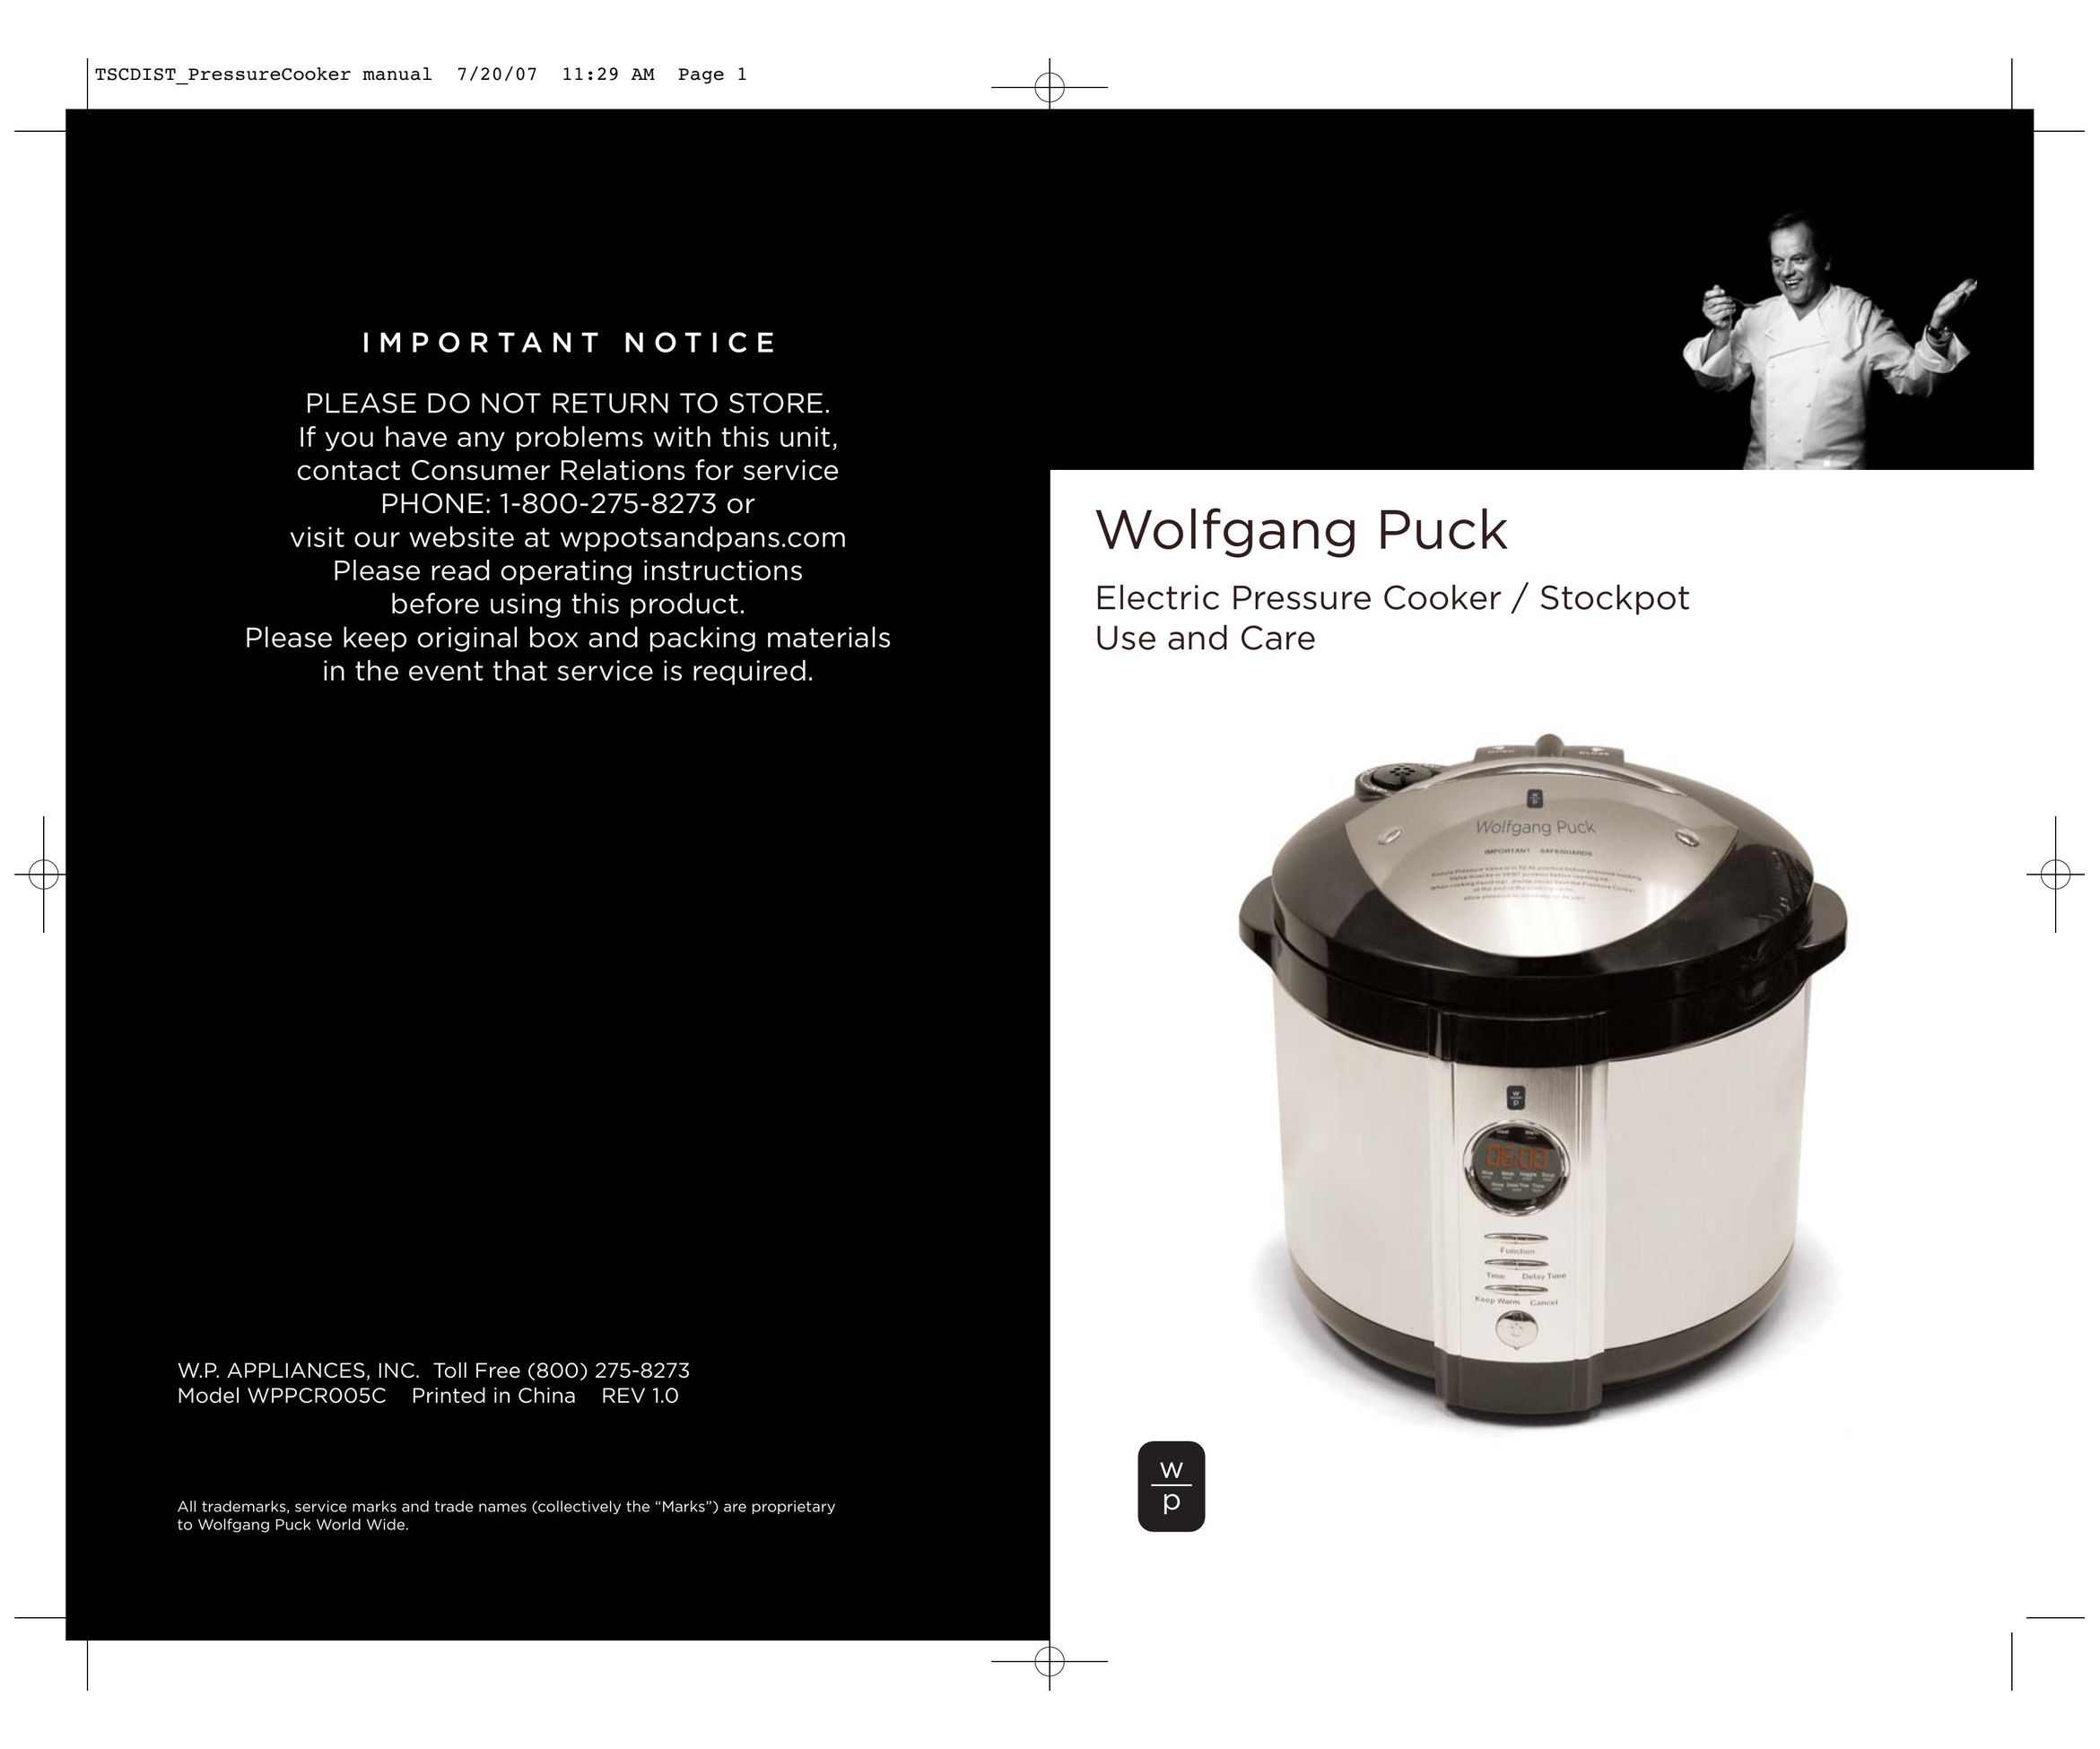 Wolfgang Puck WPPCR005C Electric Pressure Cooker User Manual